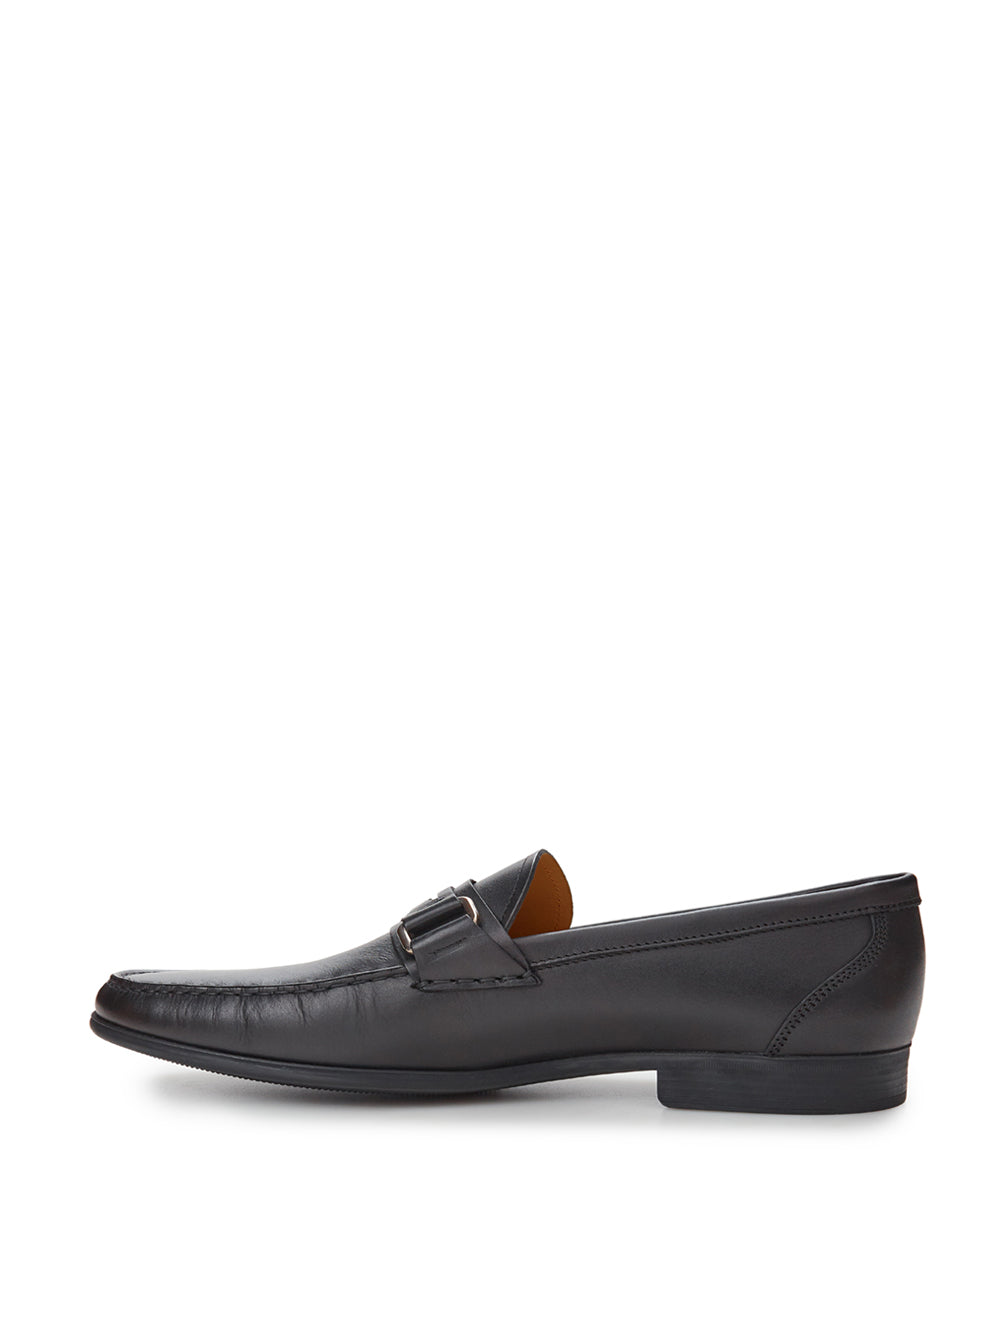 Coniac moccasin in Bally black leather